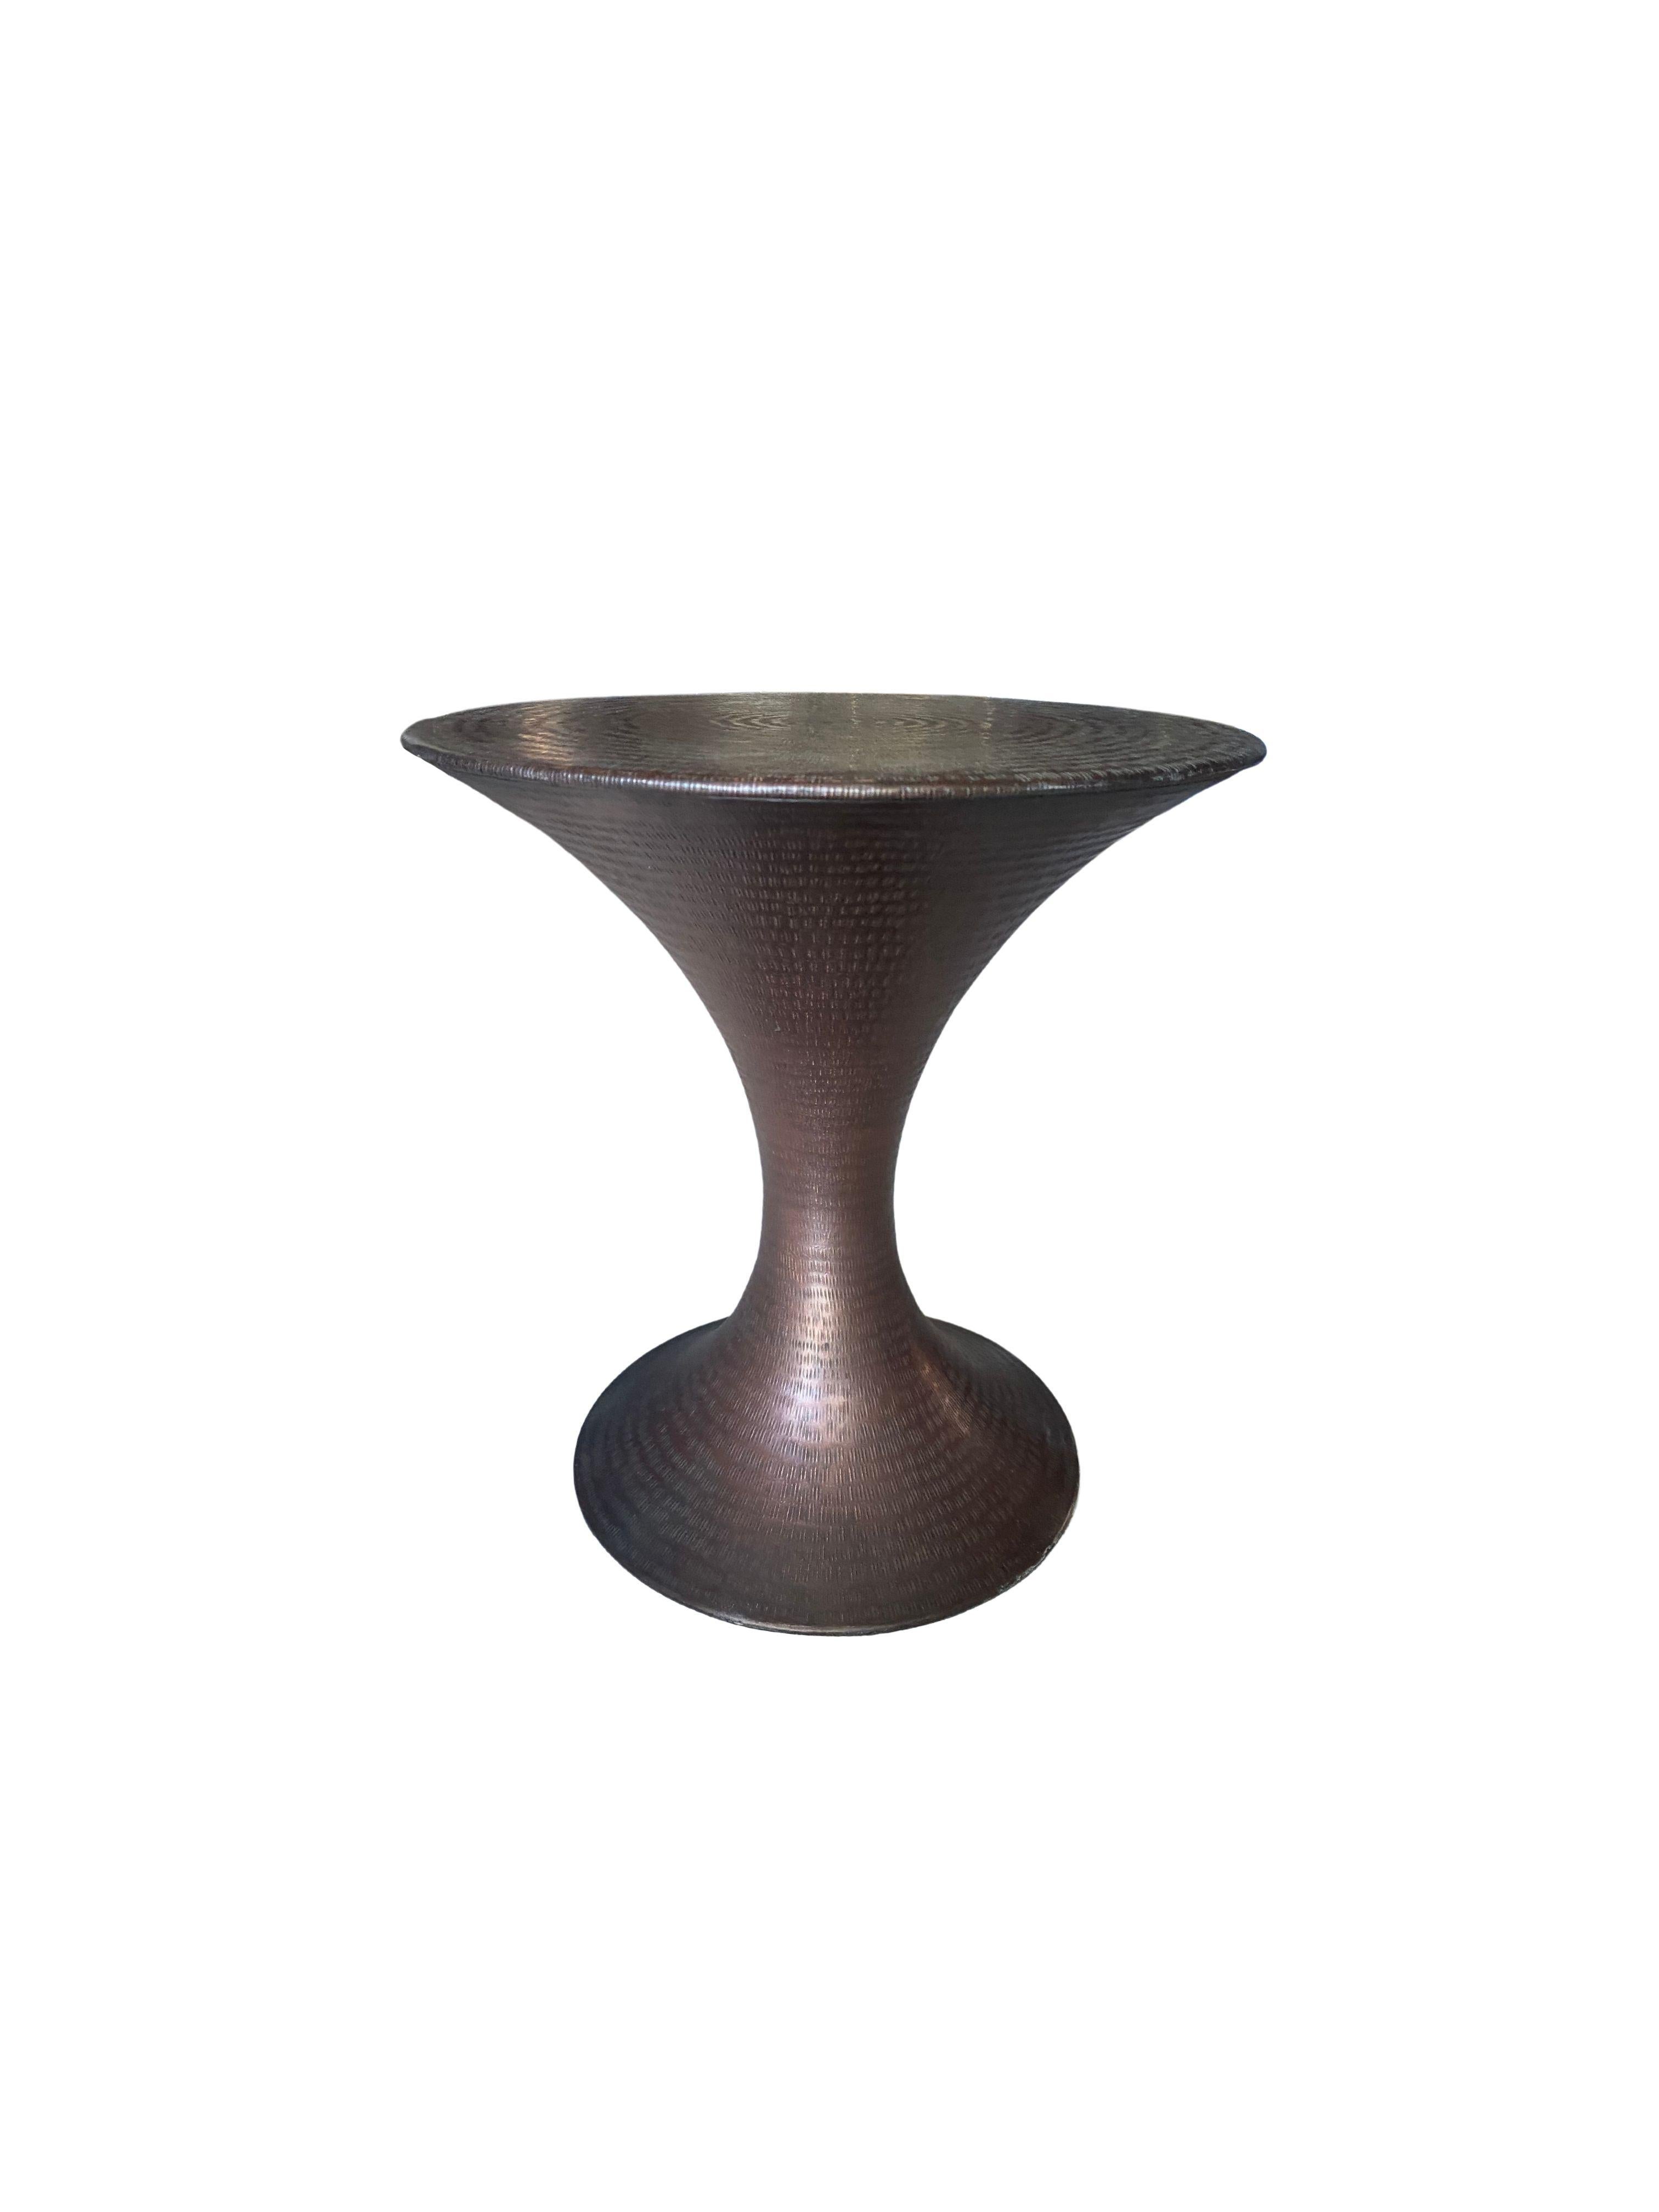 Modern Round Brass Side Table with Hammered Detailing